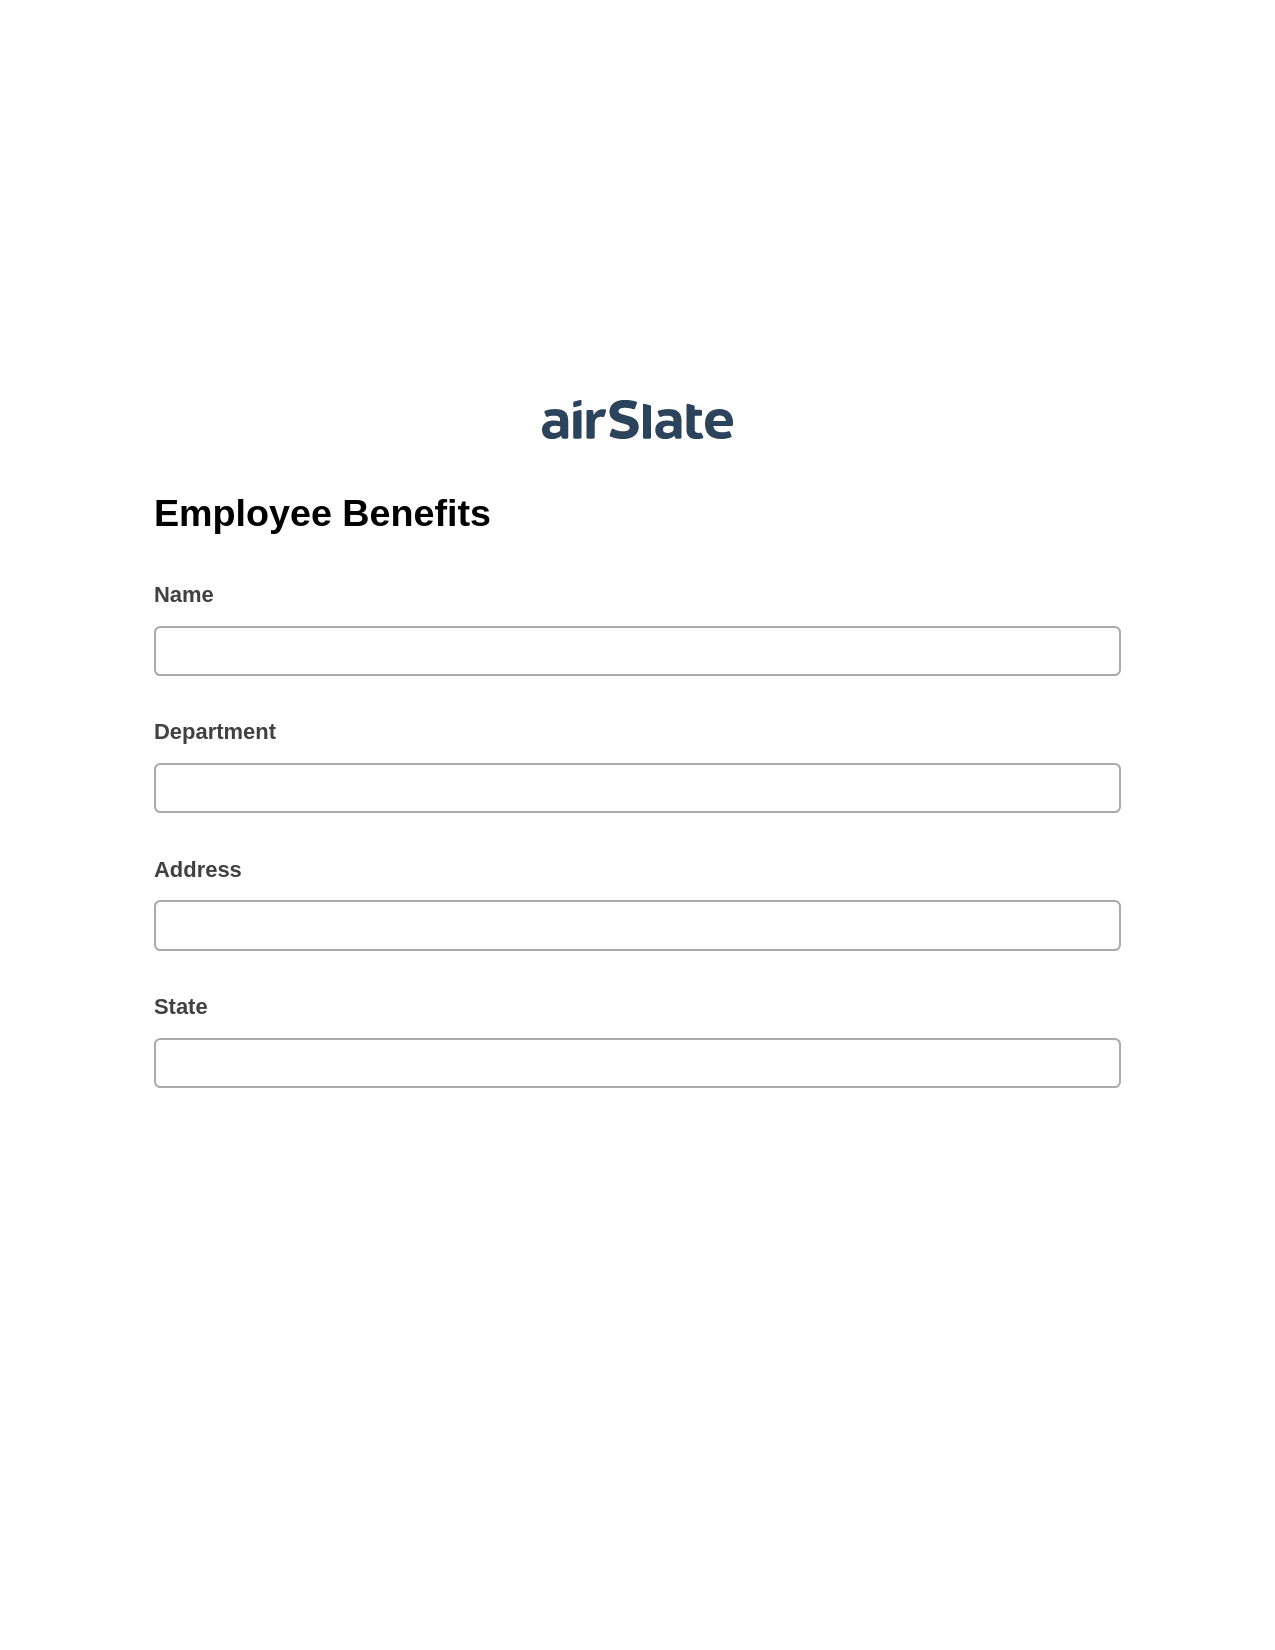 Employee Benefits Pre-fill from CSV File Bot, Hide Signatures Bot, Export to MySQL Bot